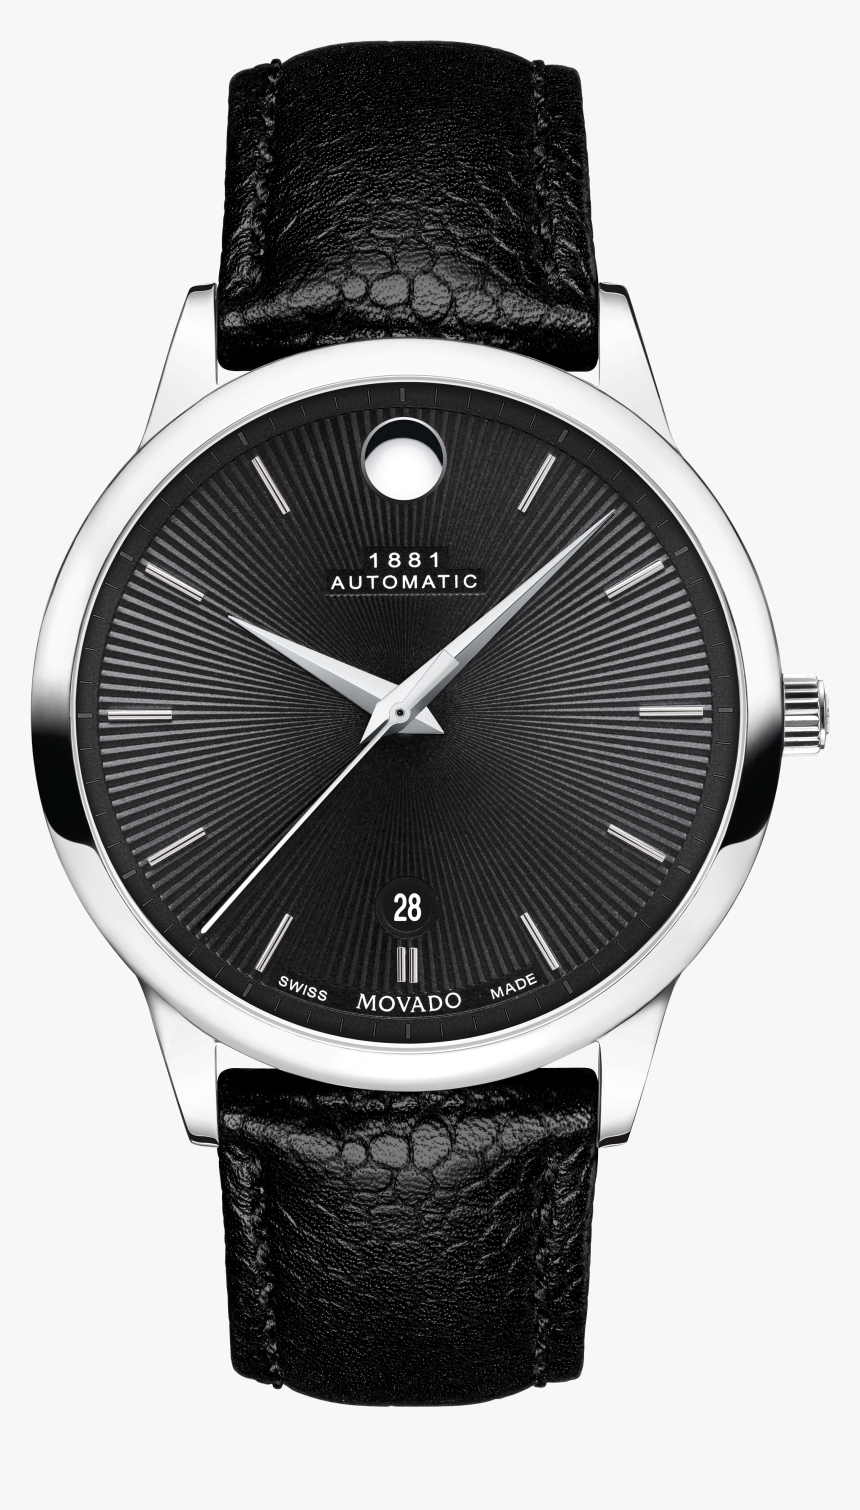 1881 Automatic - Movado Automatic, HD Png Download, Free Download